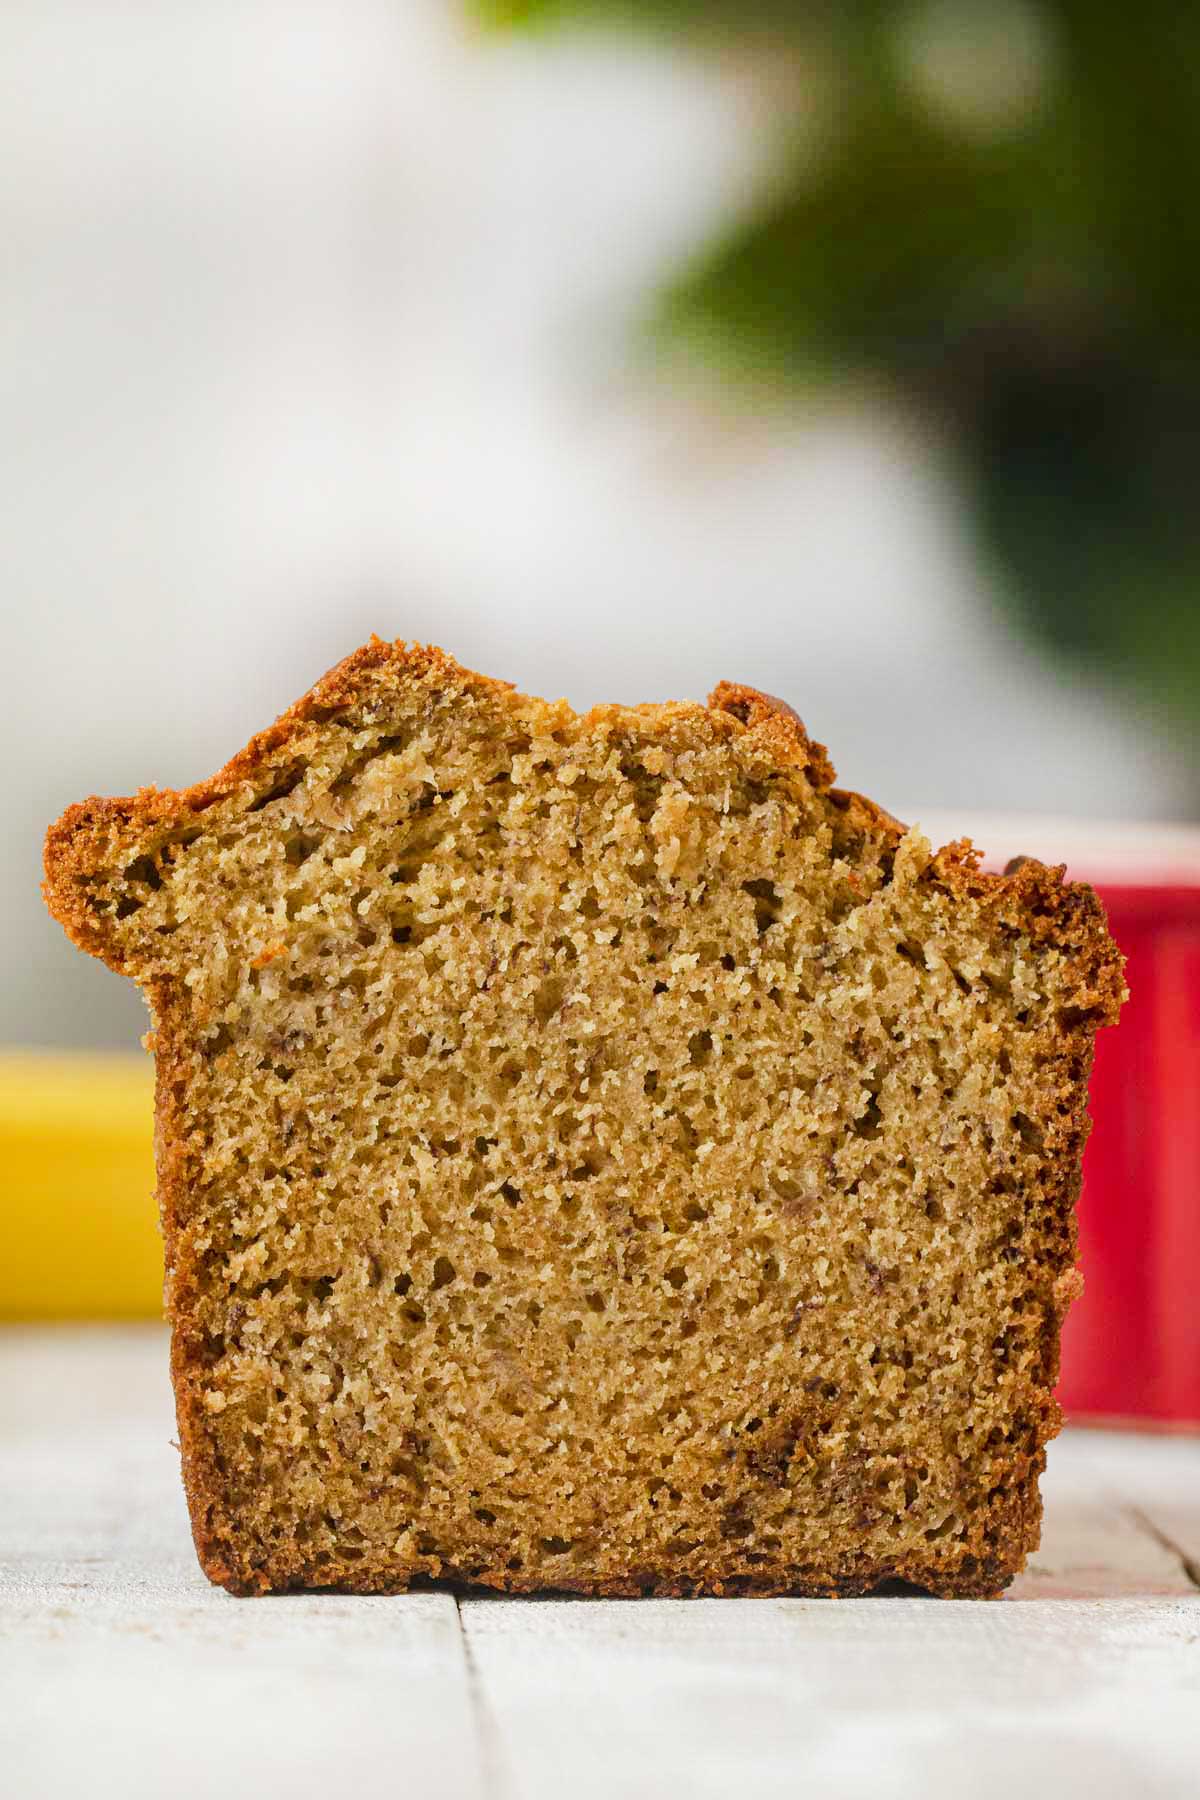 Whole Wheat Banana Bread (1-Bowl, So Easy!) - Cooking Made Healthy